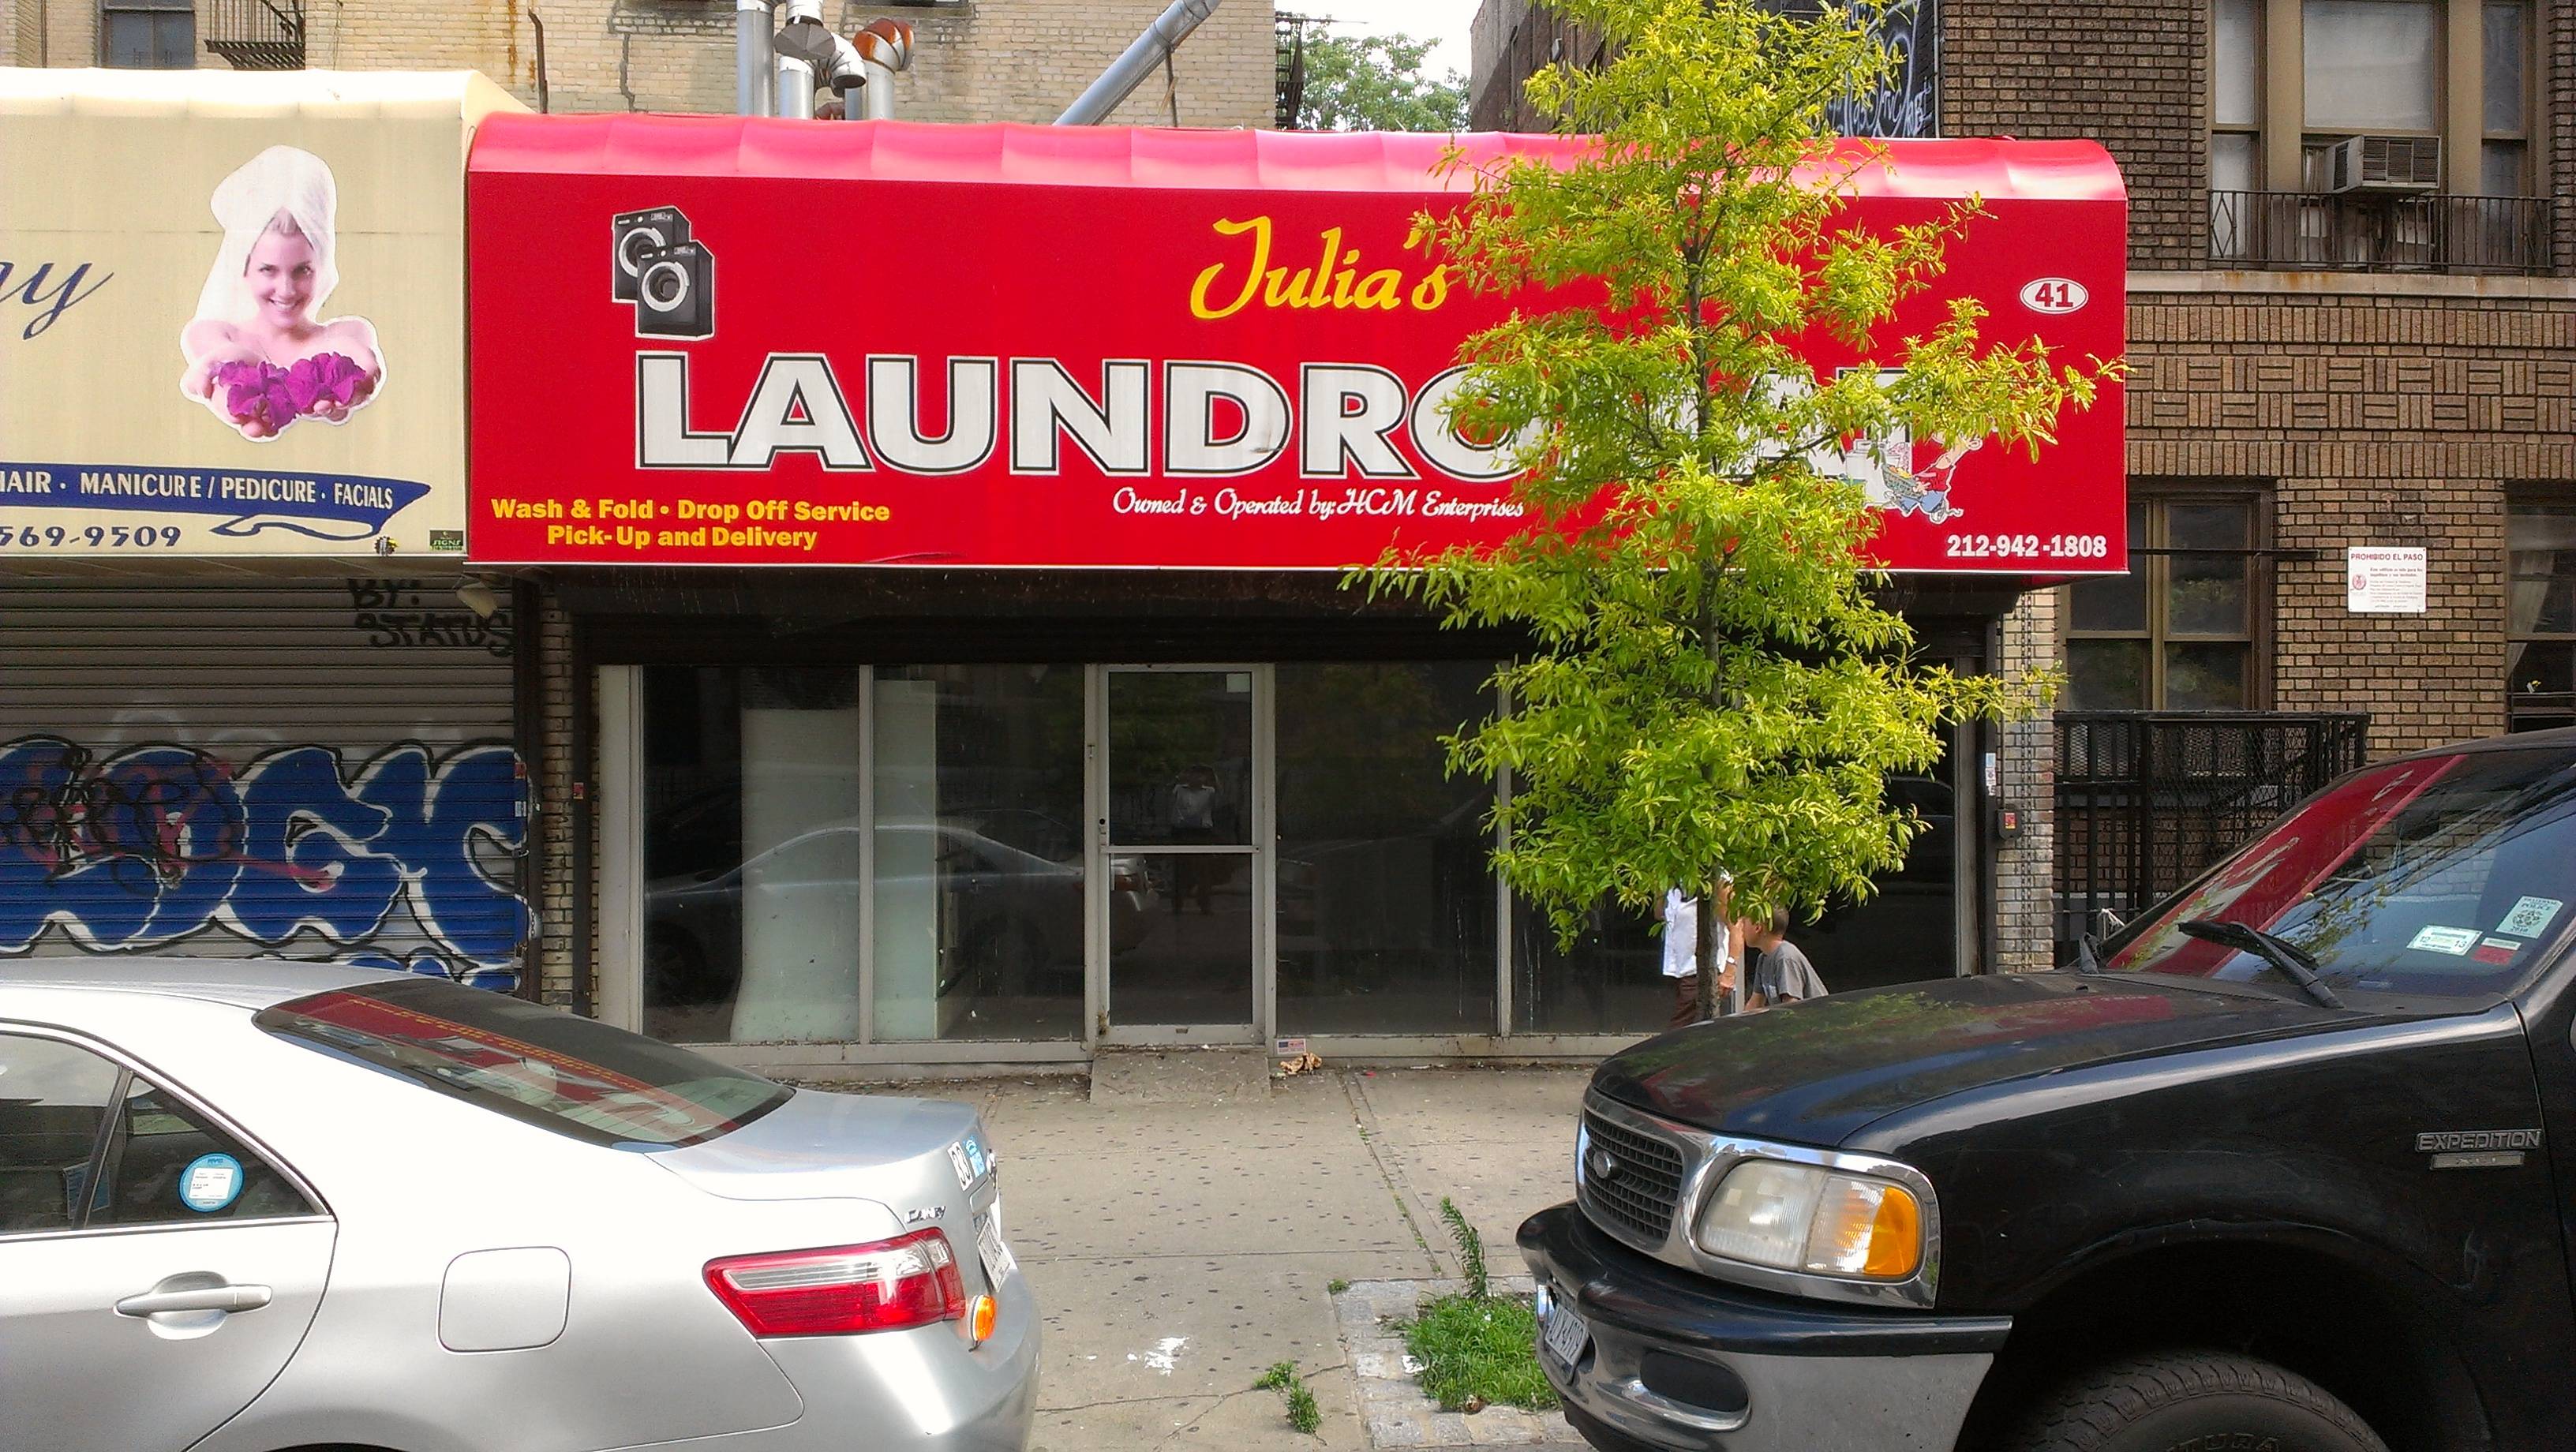 Laundromat Can be Leased or Converted for Any Retail Use - Busy Inwood Location - No Fee!***